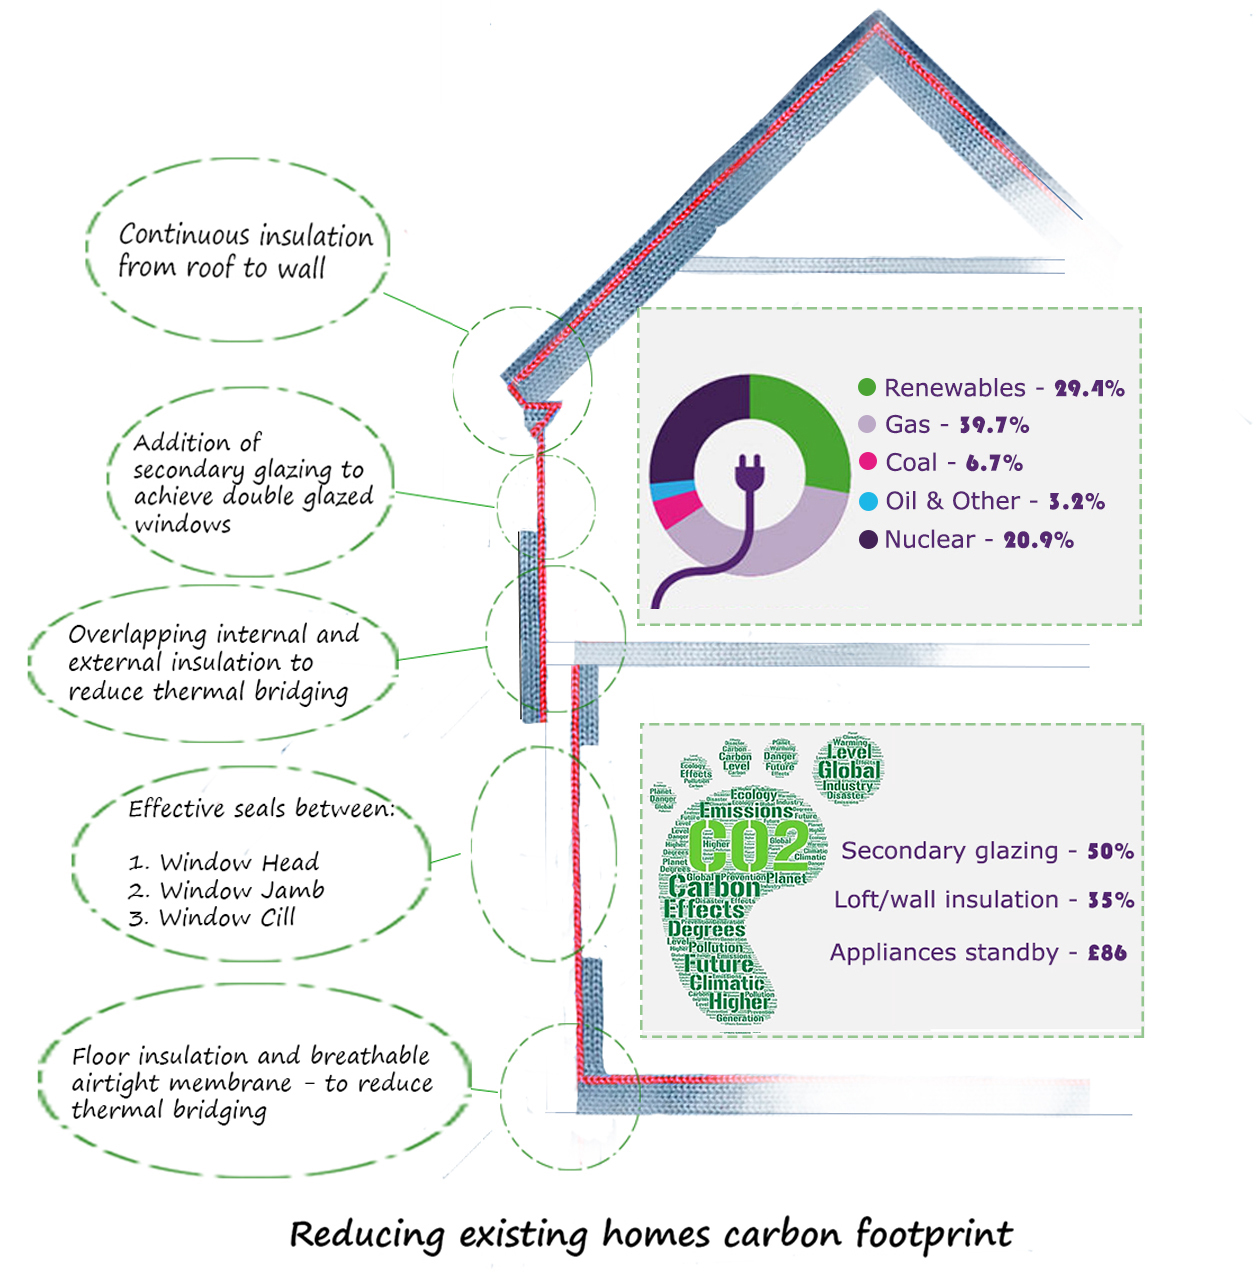 Reducing existing homes carbon footprint